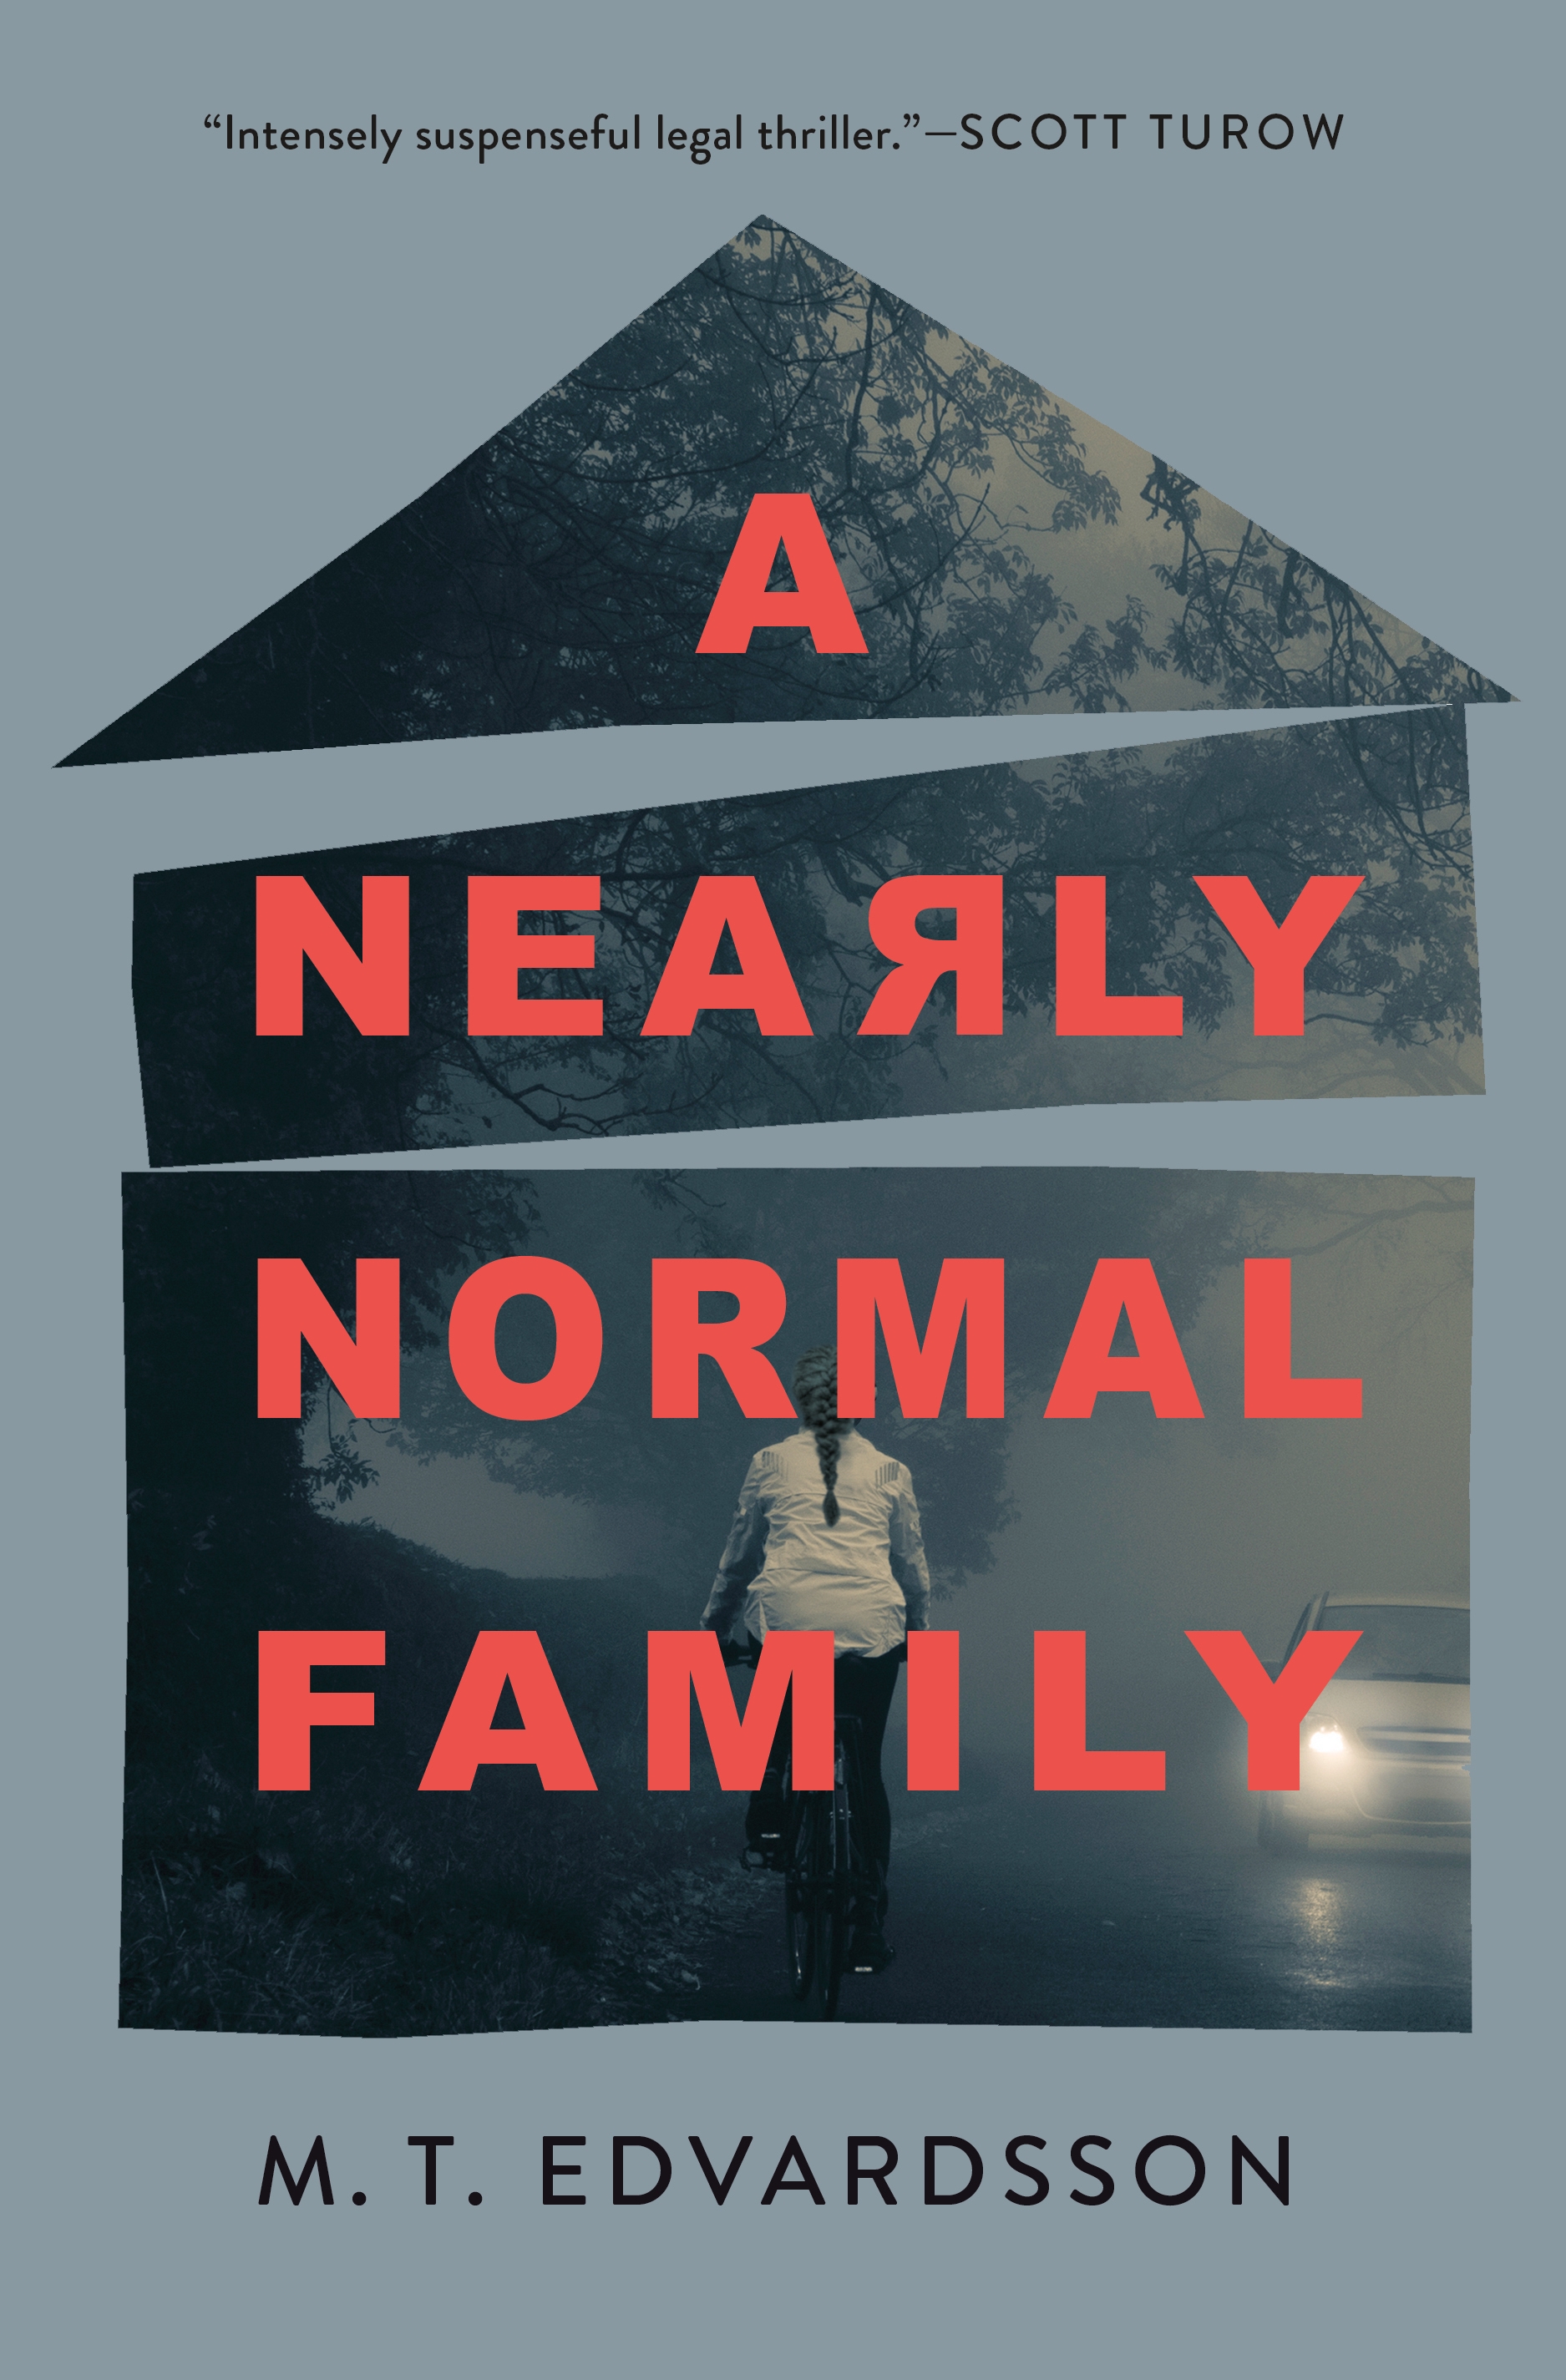 A book cover for the novel "a nearly normal family" by m. t. edvardsson, featuring a suspenseful scene with a silhouette of a person on a bicycle and a car on a foggy road, overlaid with intriguing geometric shapes and bold typography, evoking a sense of mystery and tension.